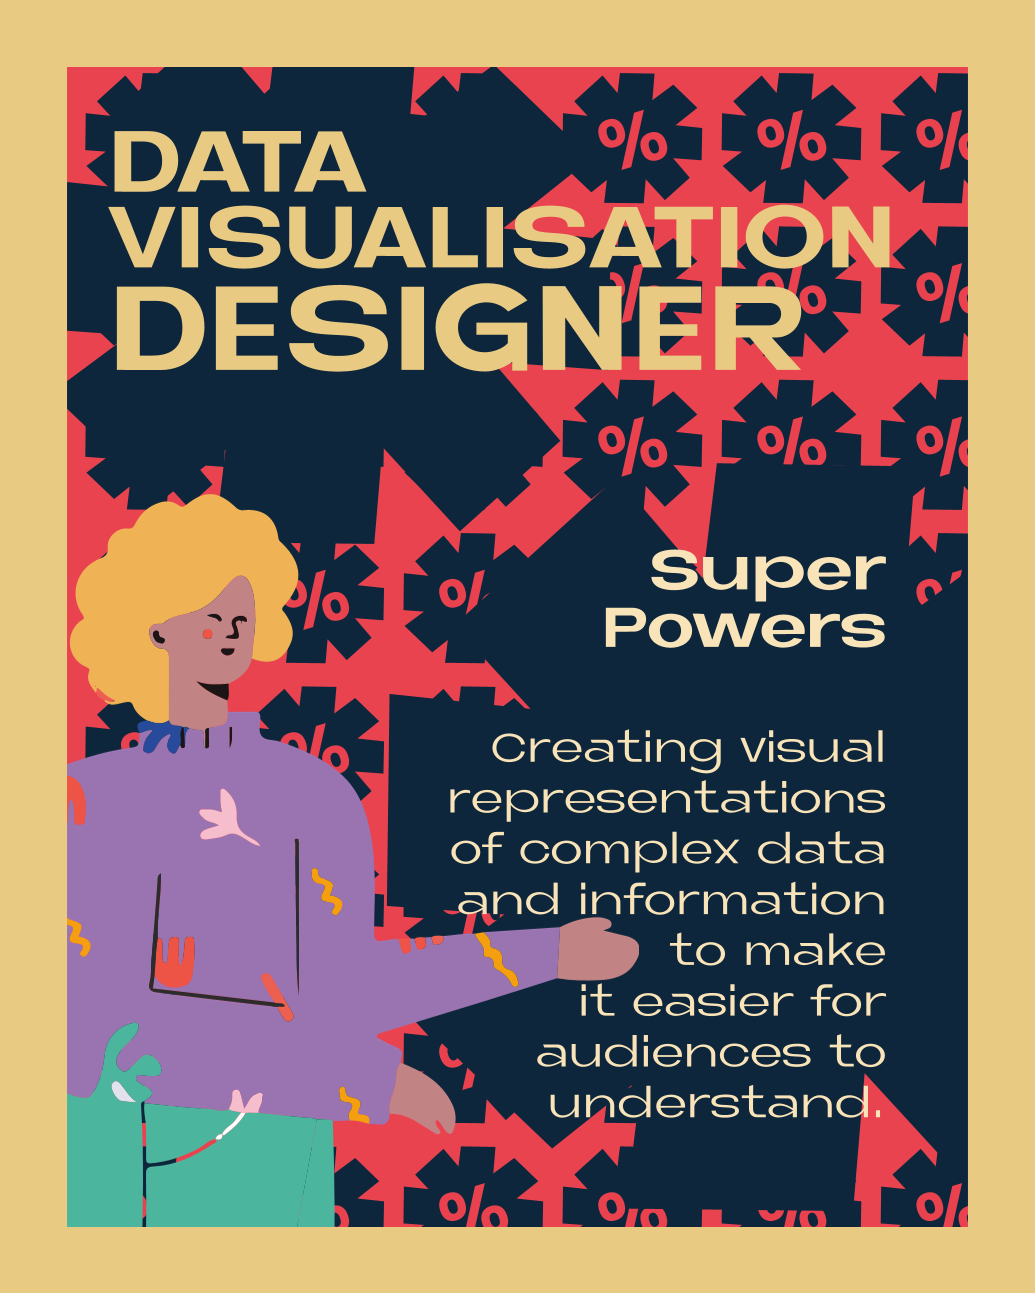 DATA VISUALISATION DESIGNER – Super Powers: Creating visual representations of complex data and information to make it easier for audiences to understand.